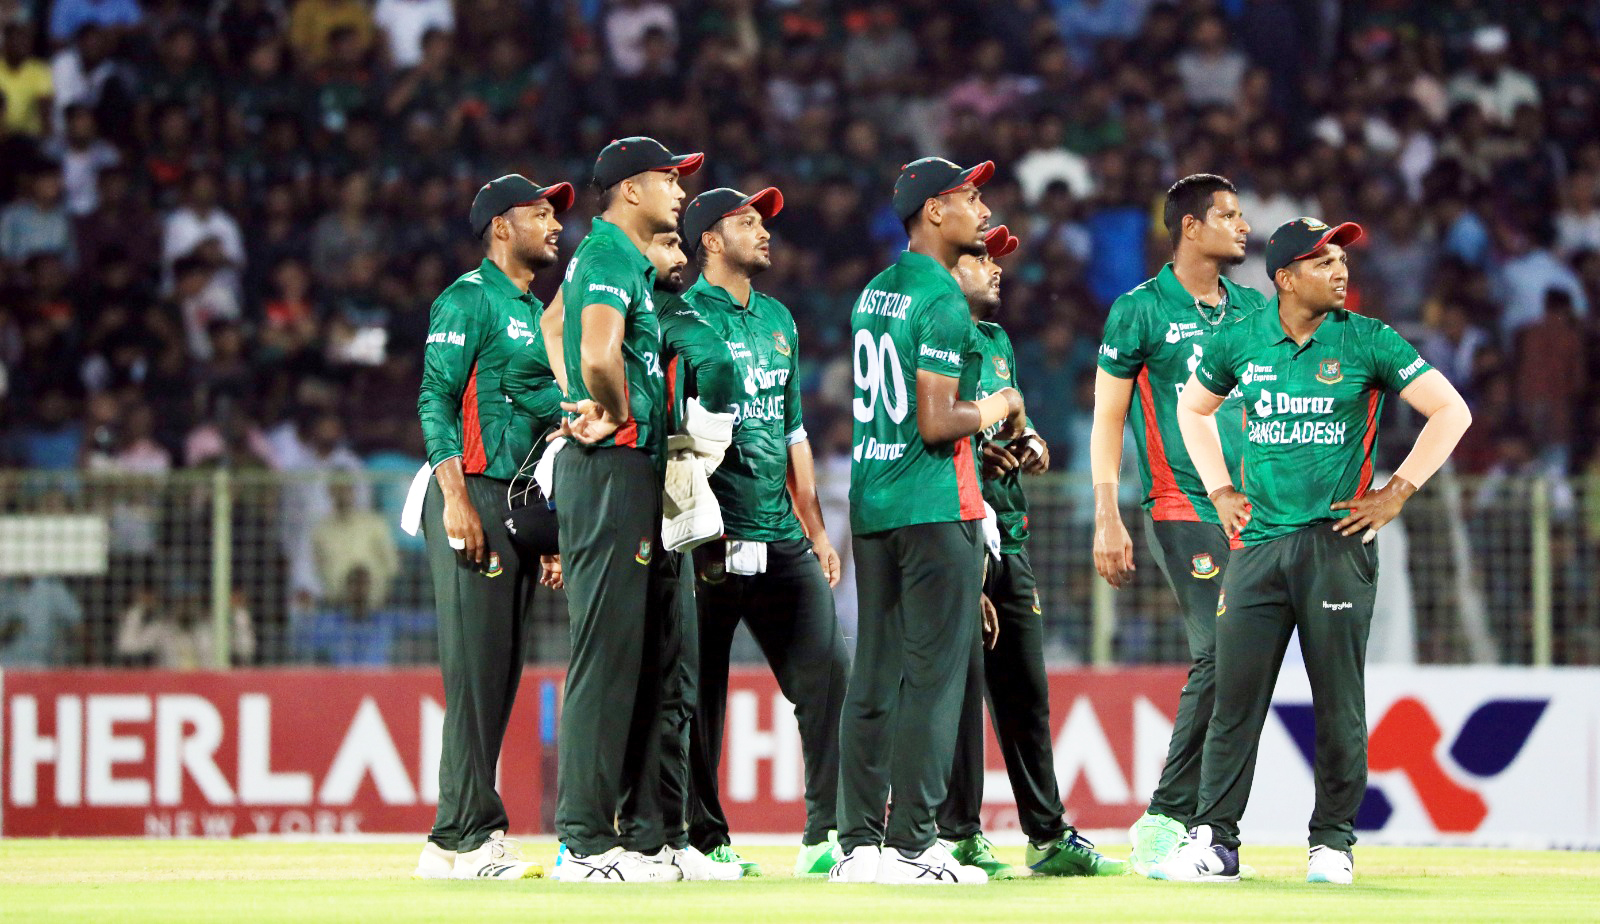 WATCH | Bangladesh almost goofs up easy chase courtesy Janat’s hattrick in last over thriller